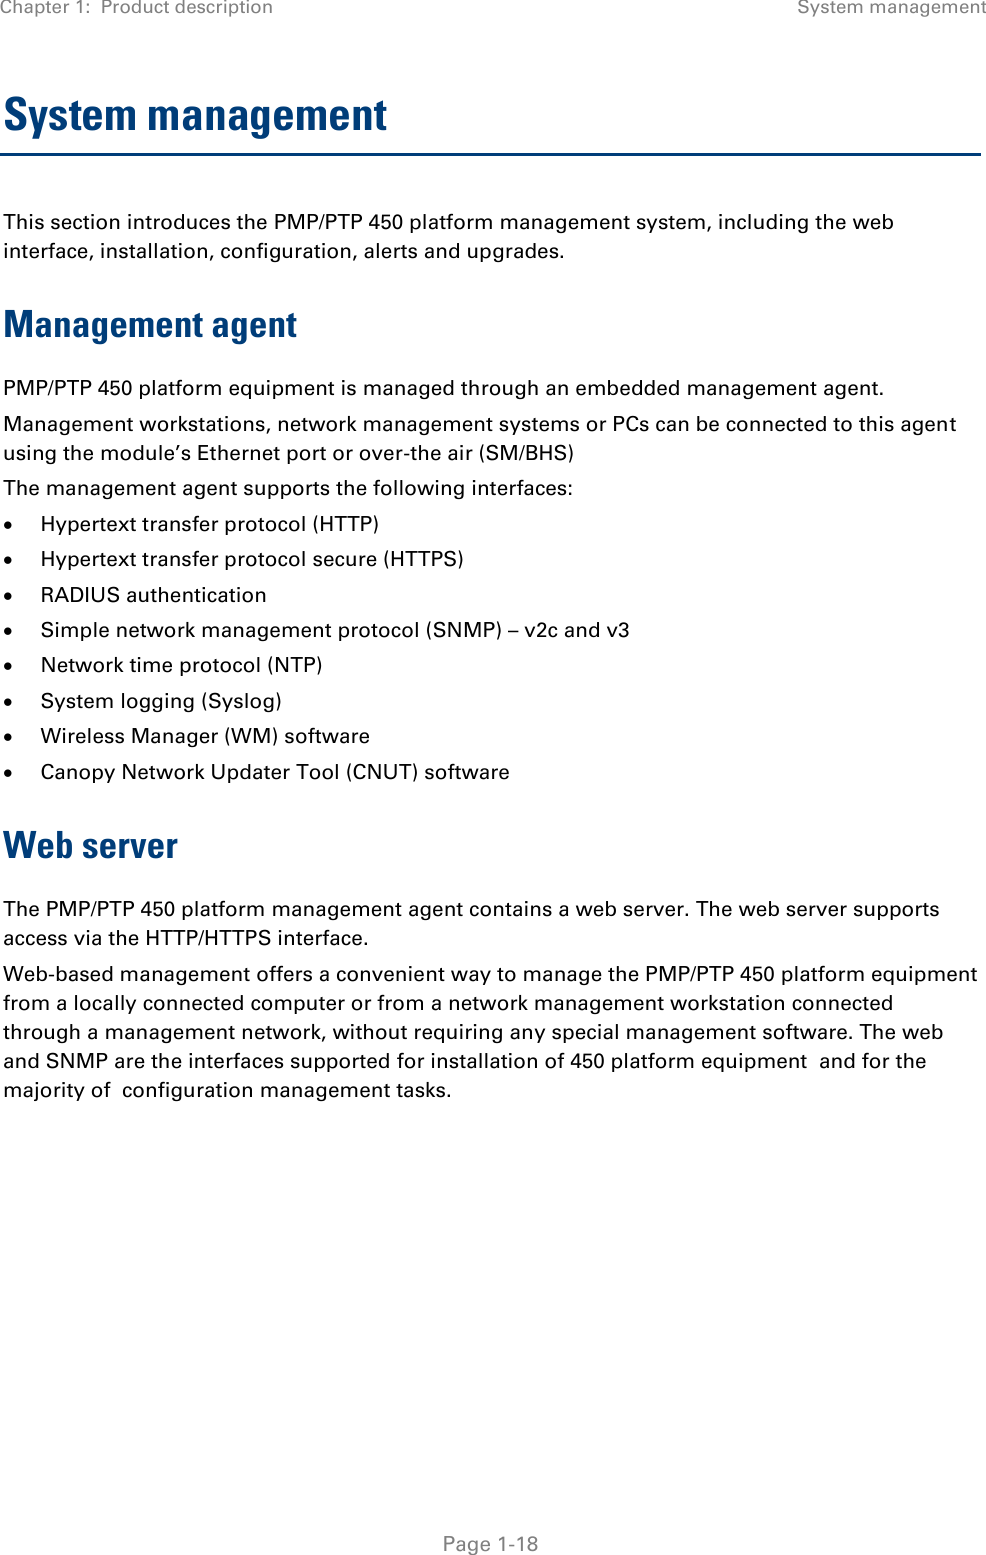 Chapter 1:  Product description System management   Page 1-18 System management This section introduces the PMP/PTP 450 platform management system, including the web interface, installation, configuration, alerts and upgrades. Management agent PMP/PTP 450 platform equipment is managed through an embedded management agent.  Management workstations, network management systems or PCs can be connected to this agent using the module’s Ethernet port or over-the air (SM/BHS)  The management agent supports the following interfaces:   Hypertext transfer protocol (HTTP)   Hypertext transfer protocol secure (HTTPS)  RADIUS authentication   Simple network management protocol (SNMP) – v2c and v3  Network time protocol (NTP)   System logging (Syslog)   Wireless Manager (WM) software   Canopy Network Updater Tool (CNUT) software  Web server The PMP/PTP 450 platform management agent contains a web server. The web server supports access via the HTTP/HTTPS interface. Web-based management offers a convenient way to manage the PMP/PTP 450 platform equipment from a locally connected computer or from a network management workstation connected through a management network, without requiring any special management software. The web and SNMP are the interfaces supported for installation of 450 platform equipment  and for the majority of  configuration management tasks.    